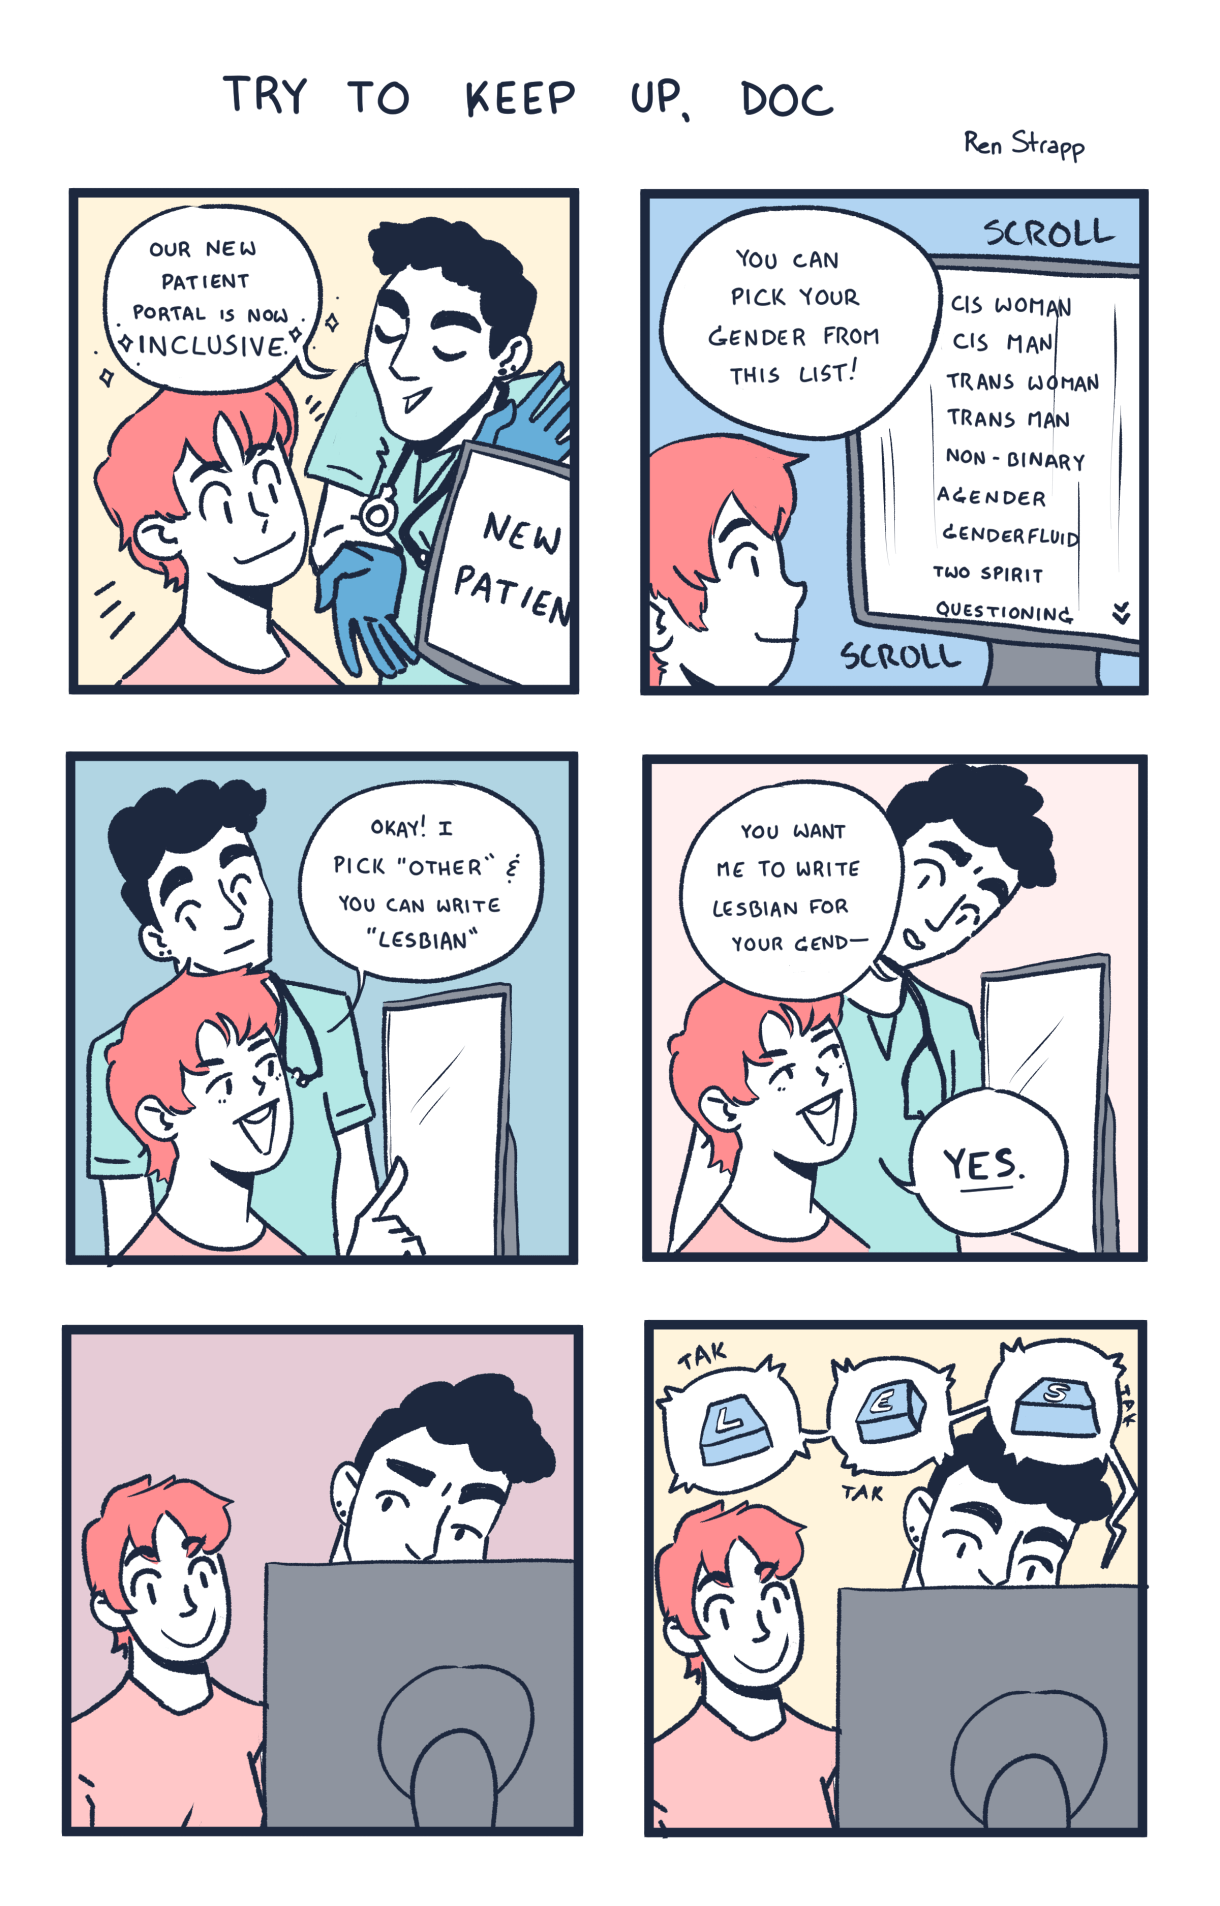 In a six panel comic drawn in pastel colors, a doctor explains to their patient that their new digital patient intake system is so inclusive! It has multiple choice options. The patient clicks other and instructs the doctor to type in "Lesbian" — confused the doctor asks, "you want your gender to say Lesbian?" The patient smiles and waits for them to begin typing.